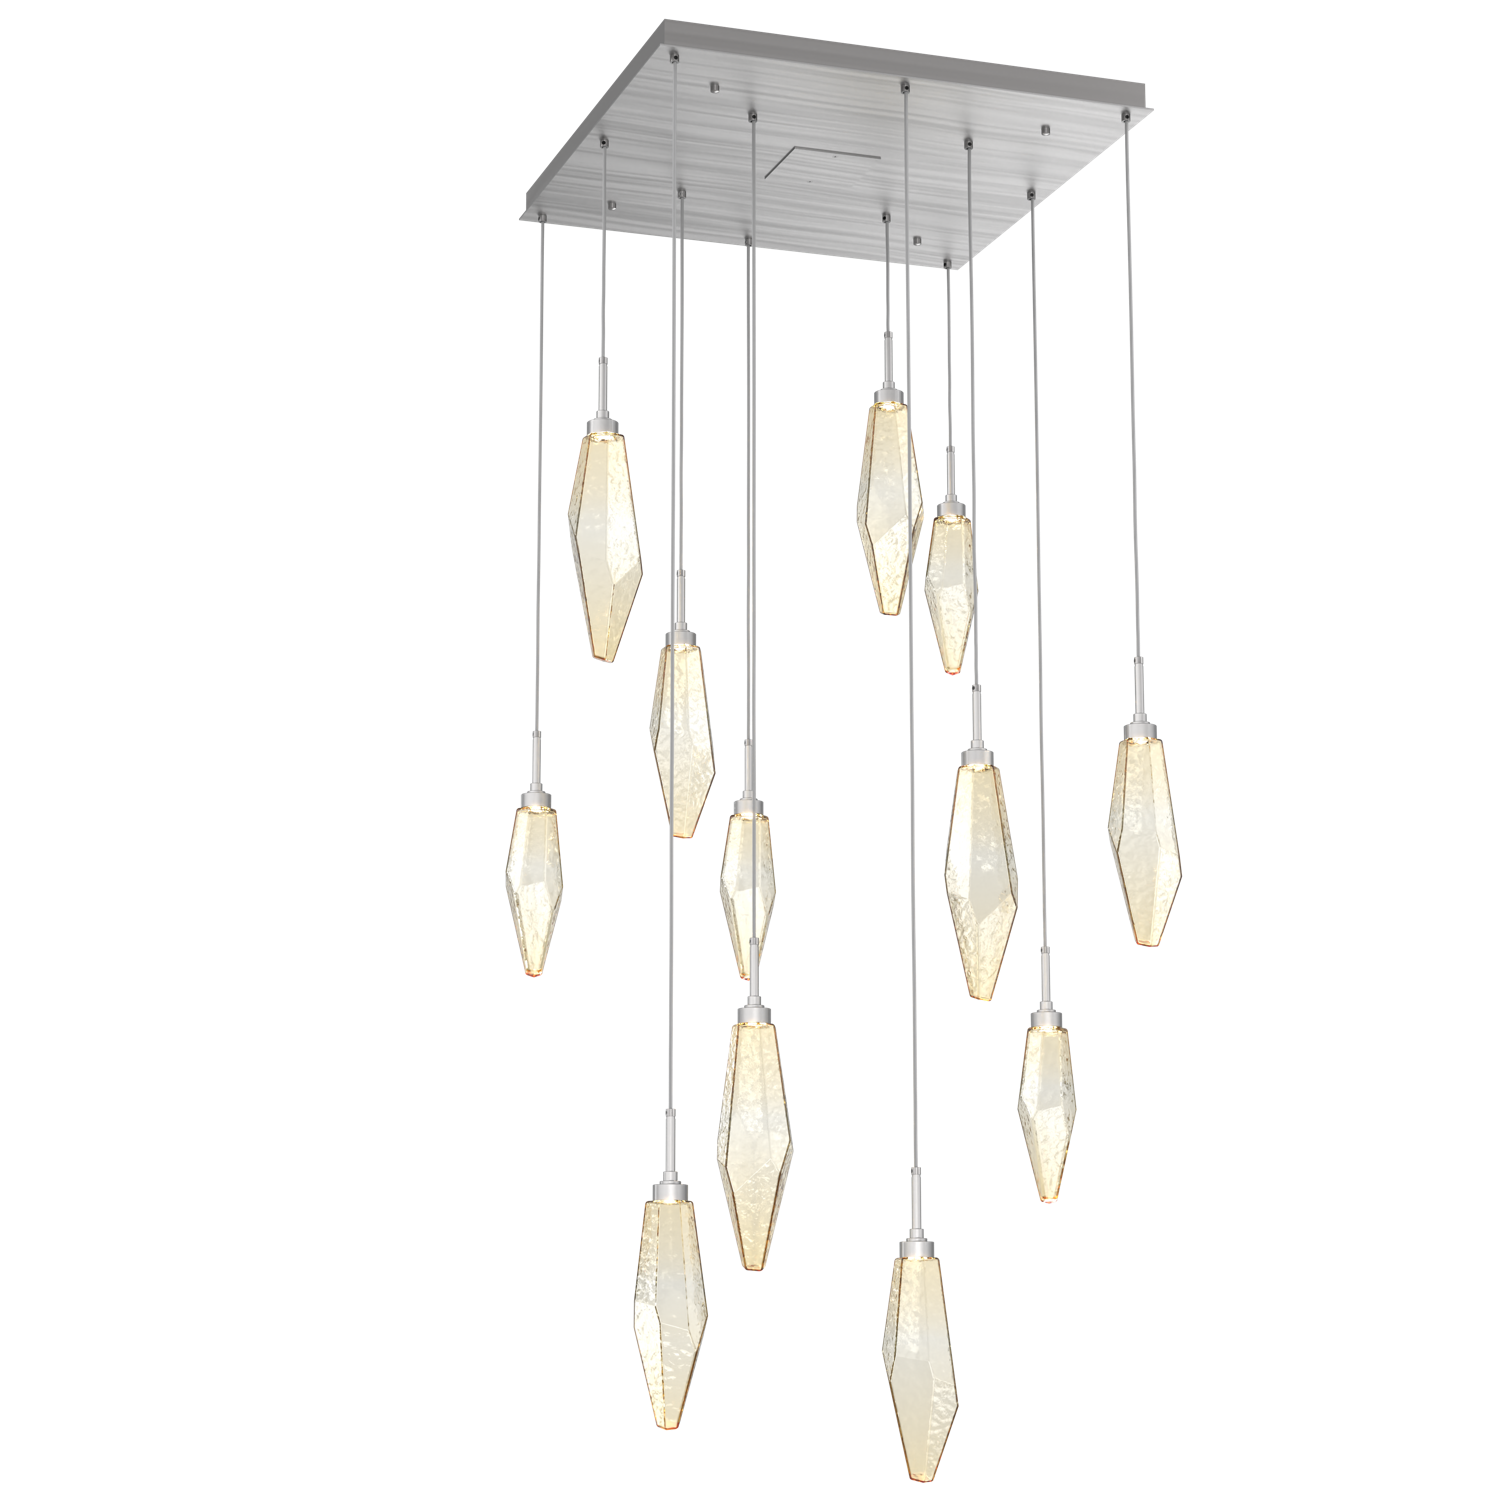 CHB0050-12-SN-CA-Hammerton-Studio-Rock-Crystal-12-light-square-pendant-chandelier-with-satin-nickel-finish-and-chilled-amber-blown-glass-shades-and-LED-lamping